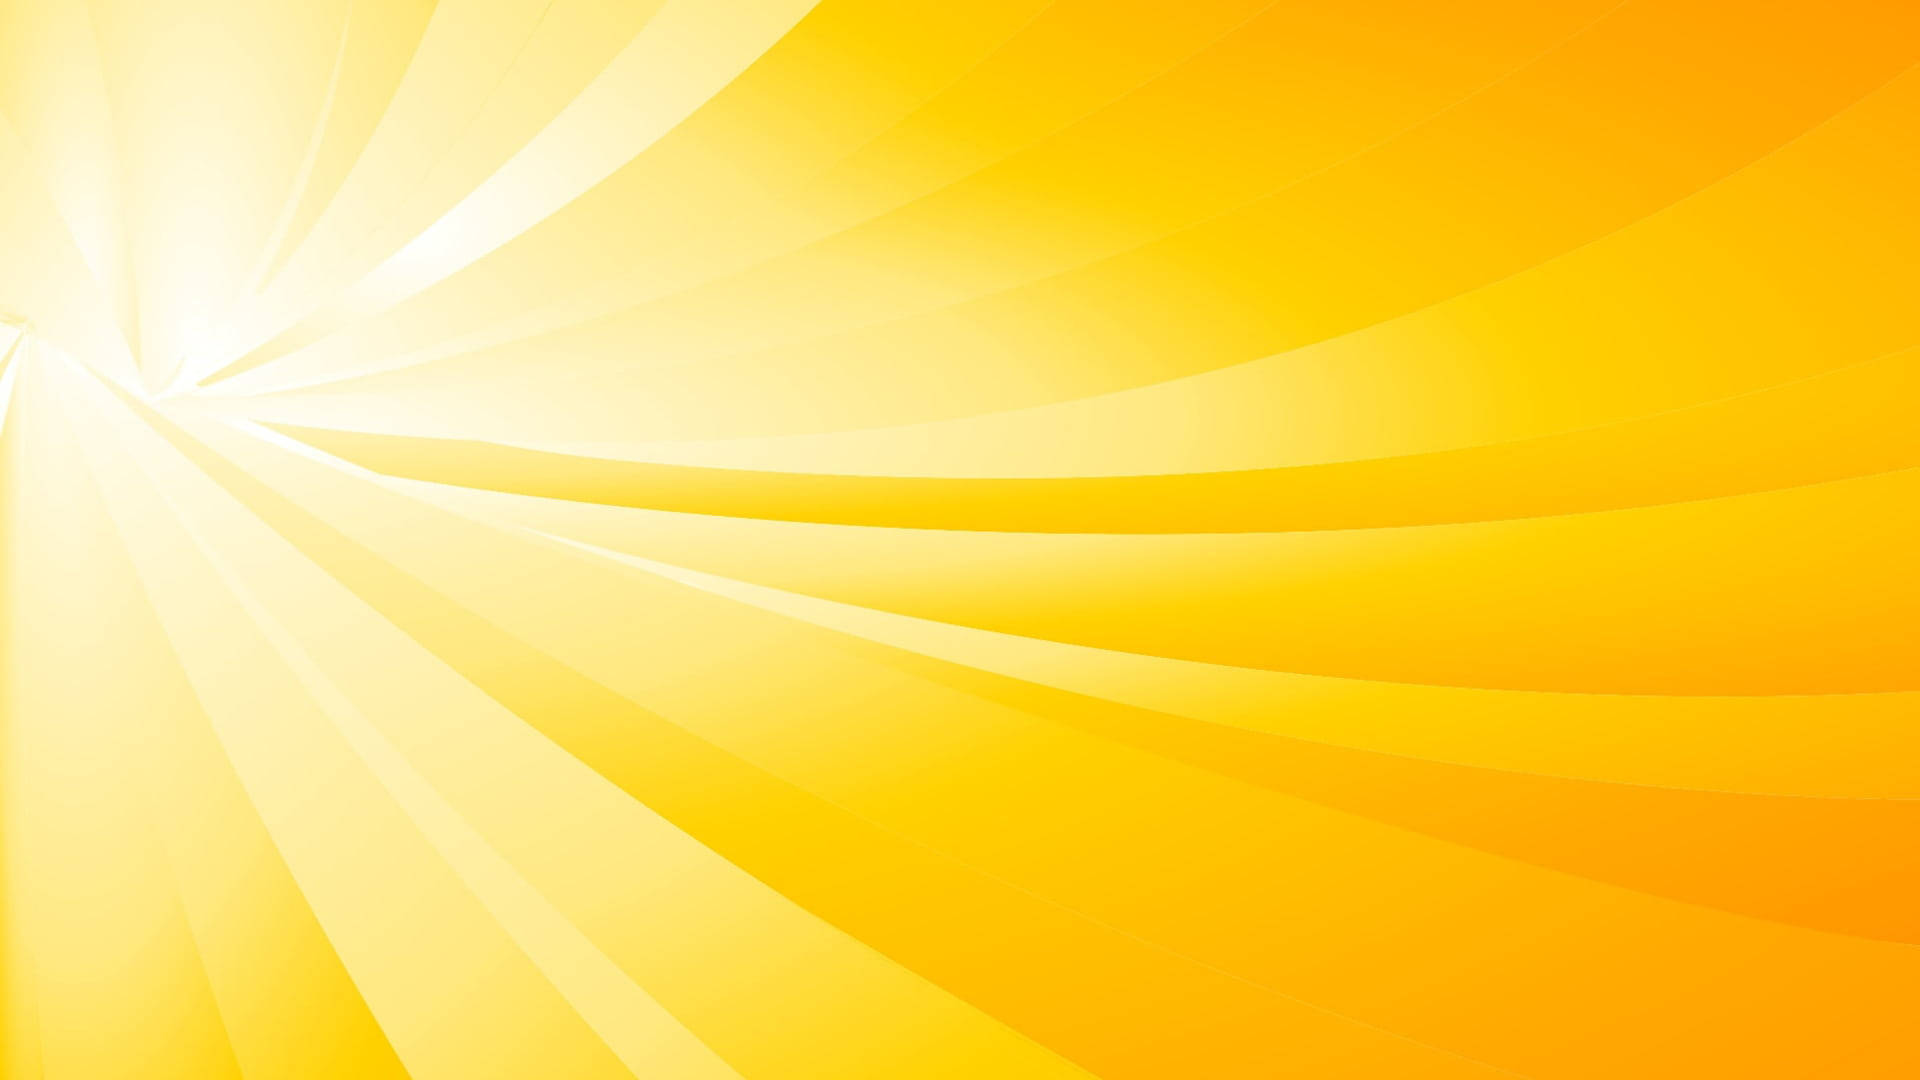 Orange And Yellow Hd Lines Wallpaper